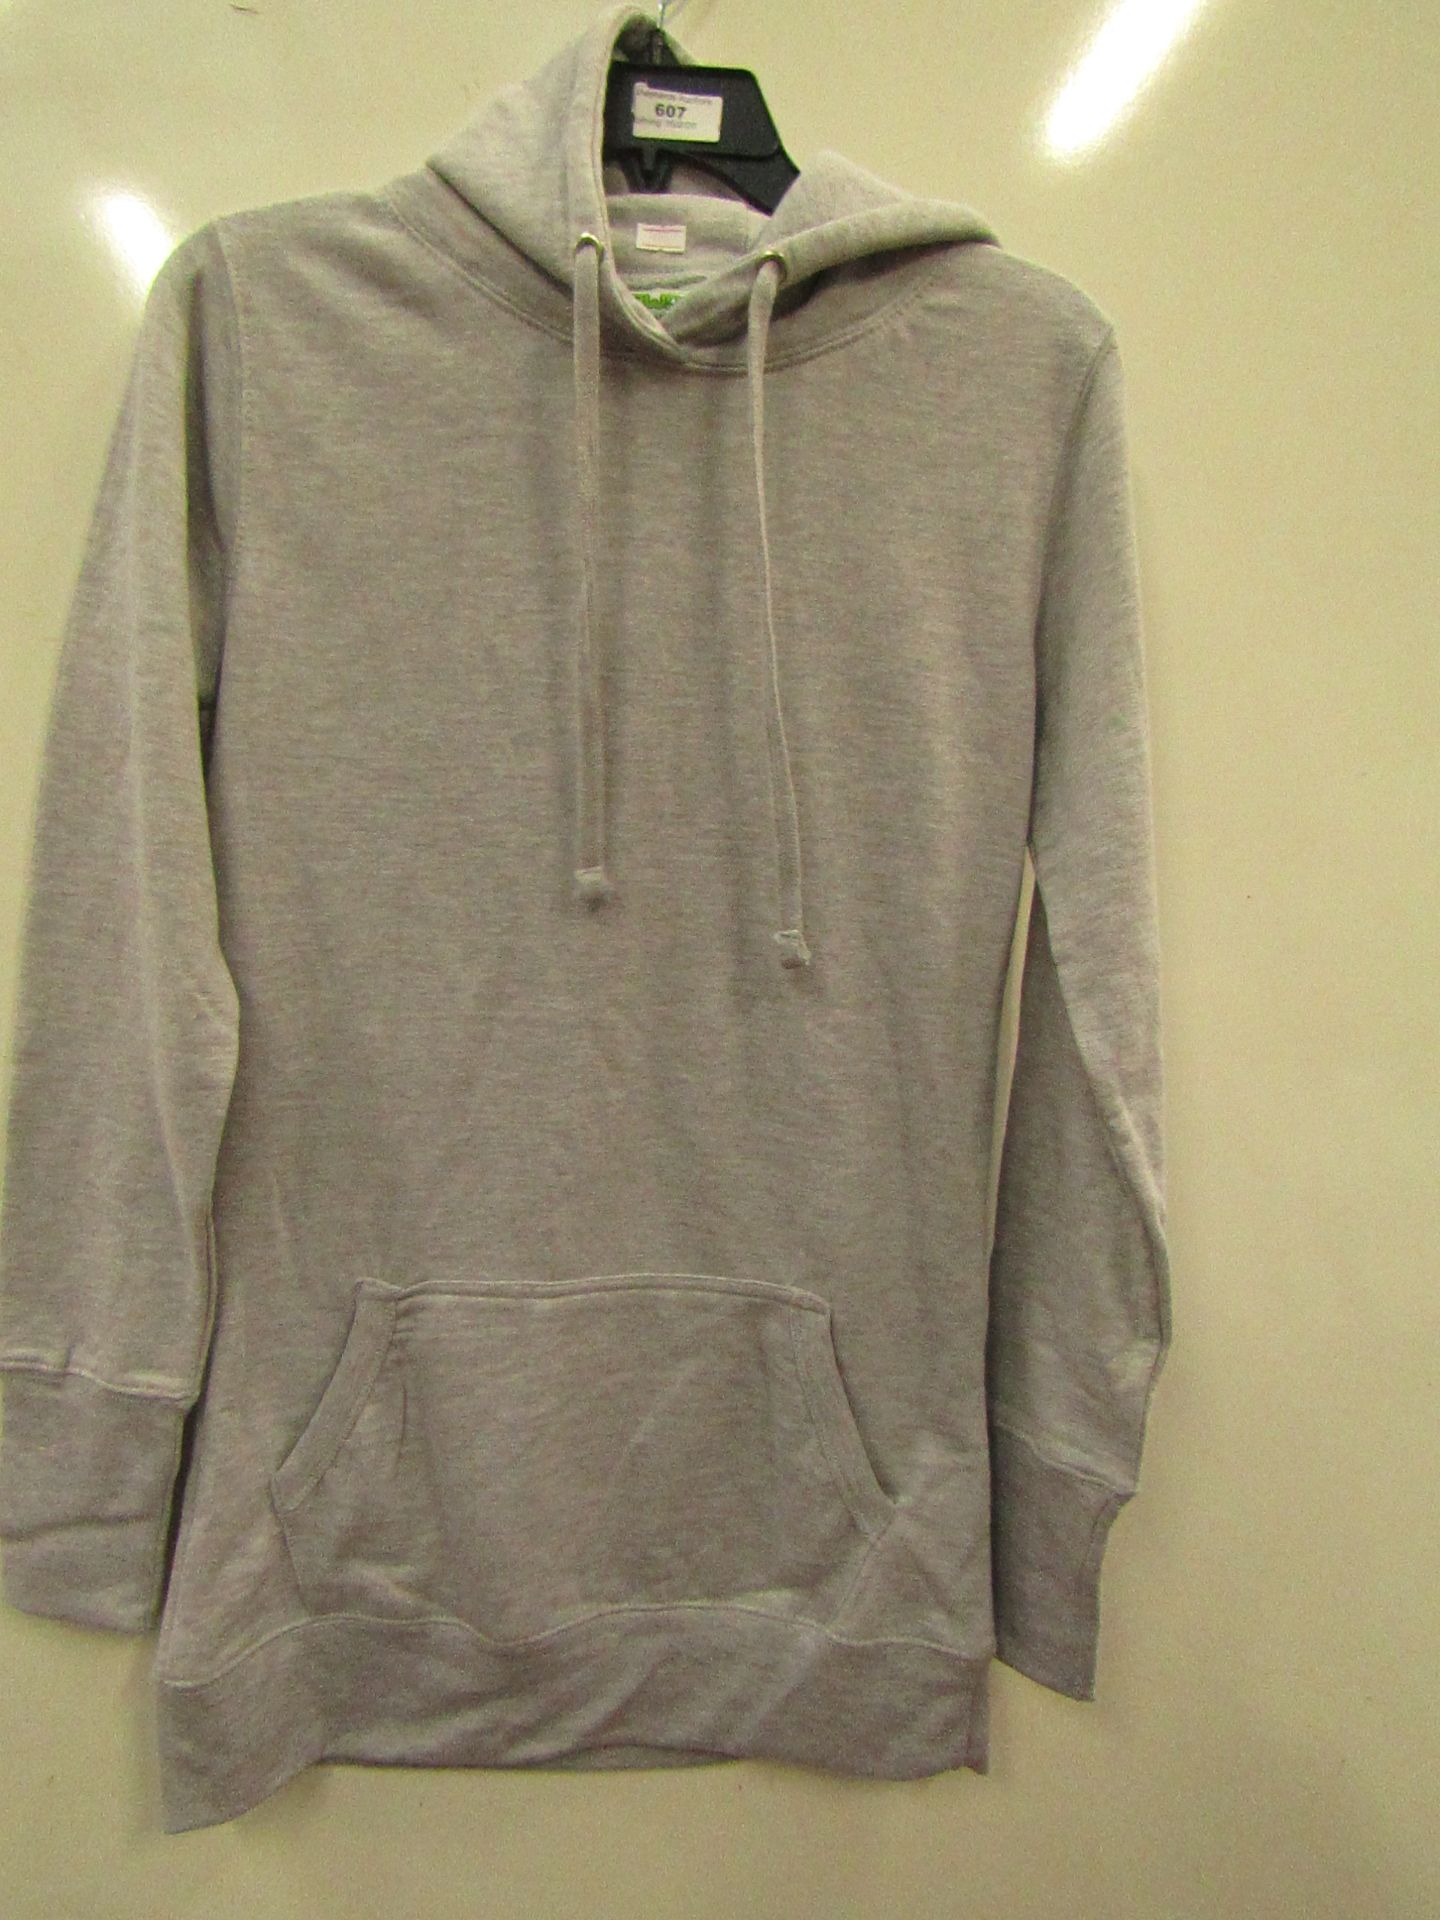 All We Do Ladies Longline Hooded Top size XS